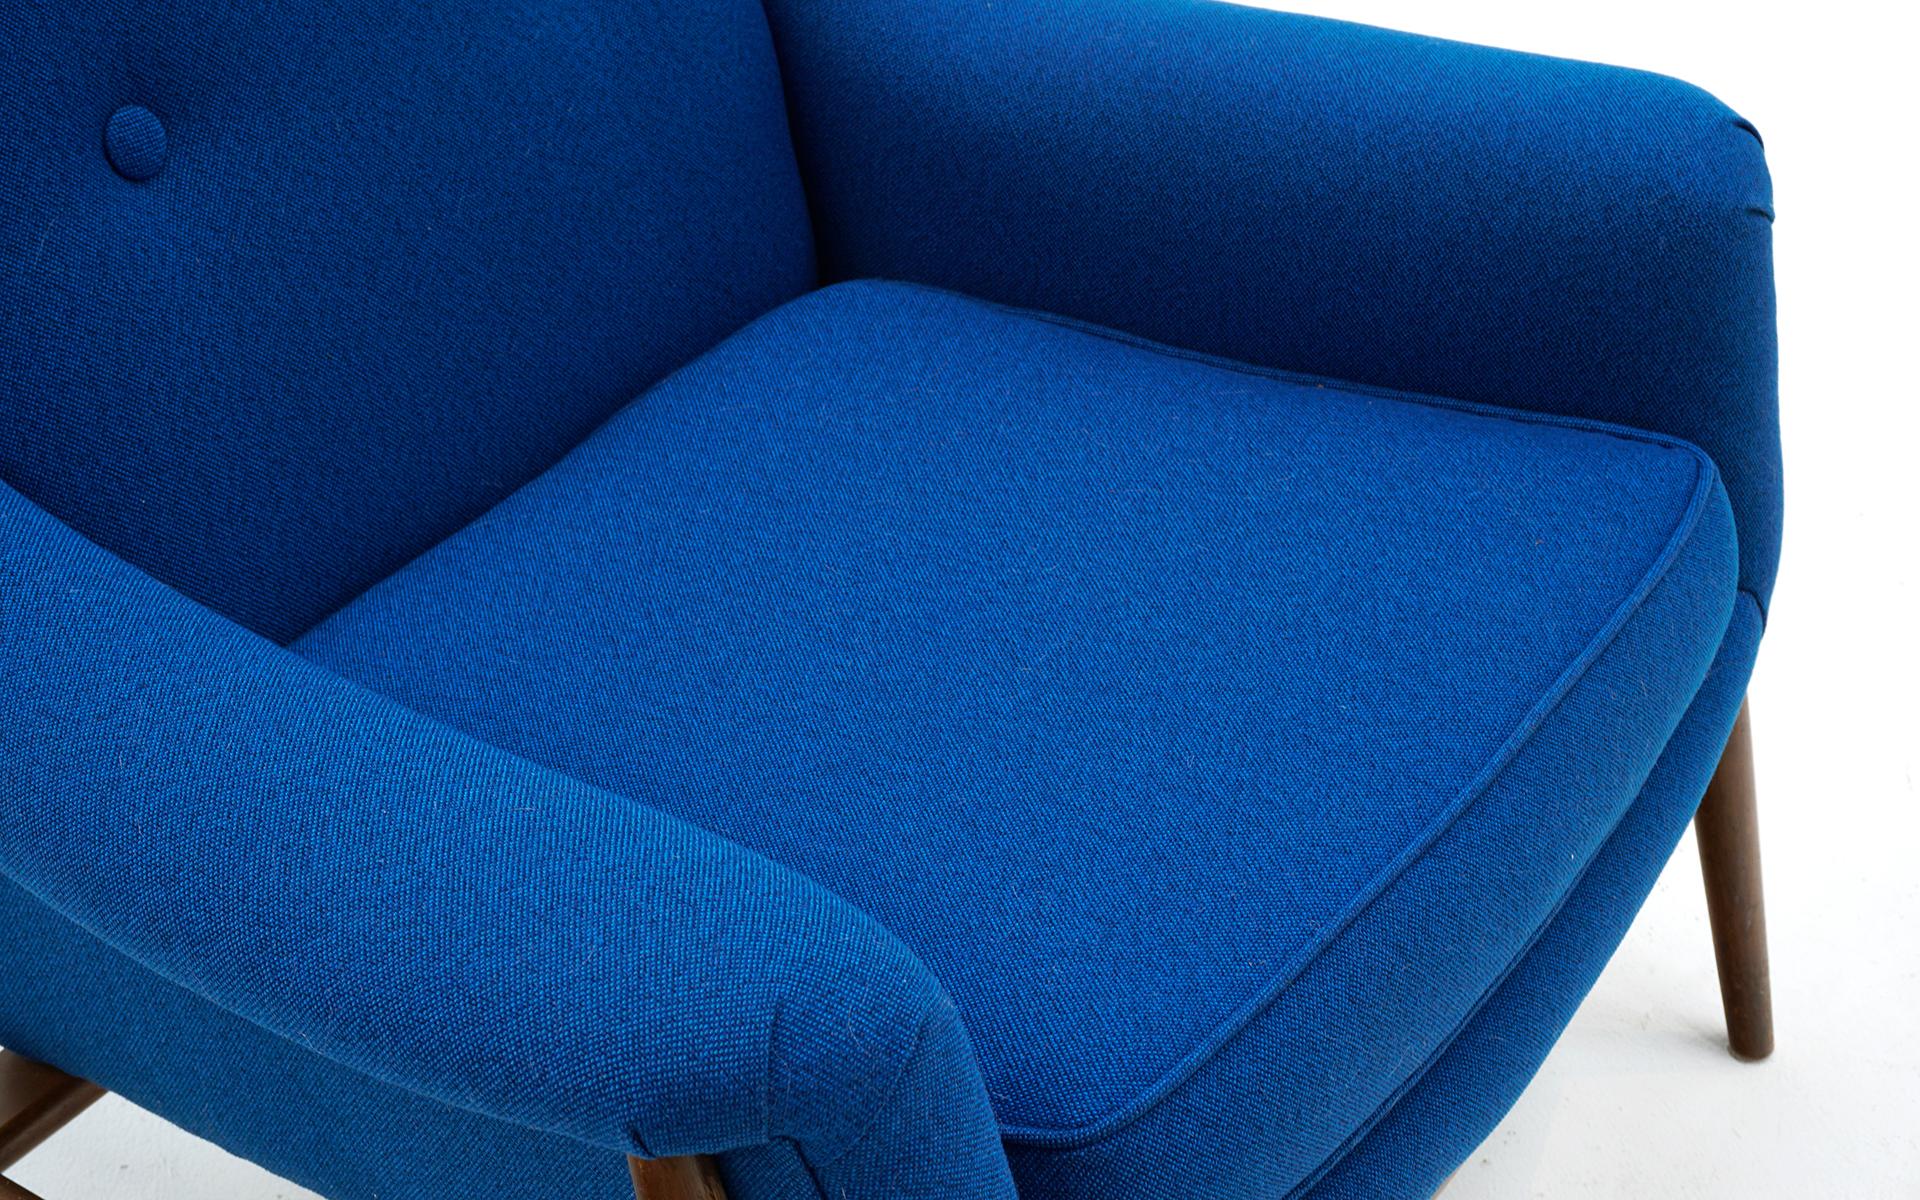 Mid-20th Century Danish Modern Lounge Chair with Arms, Teak with New Blue Maharam Upholstery